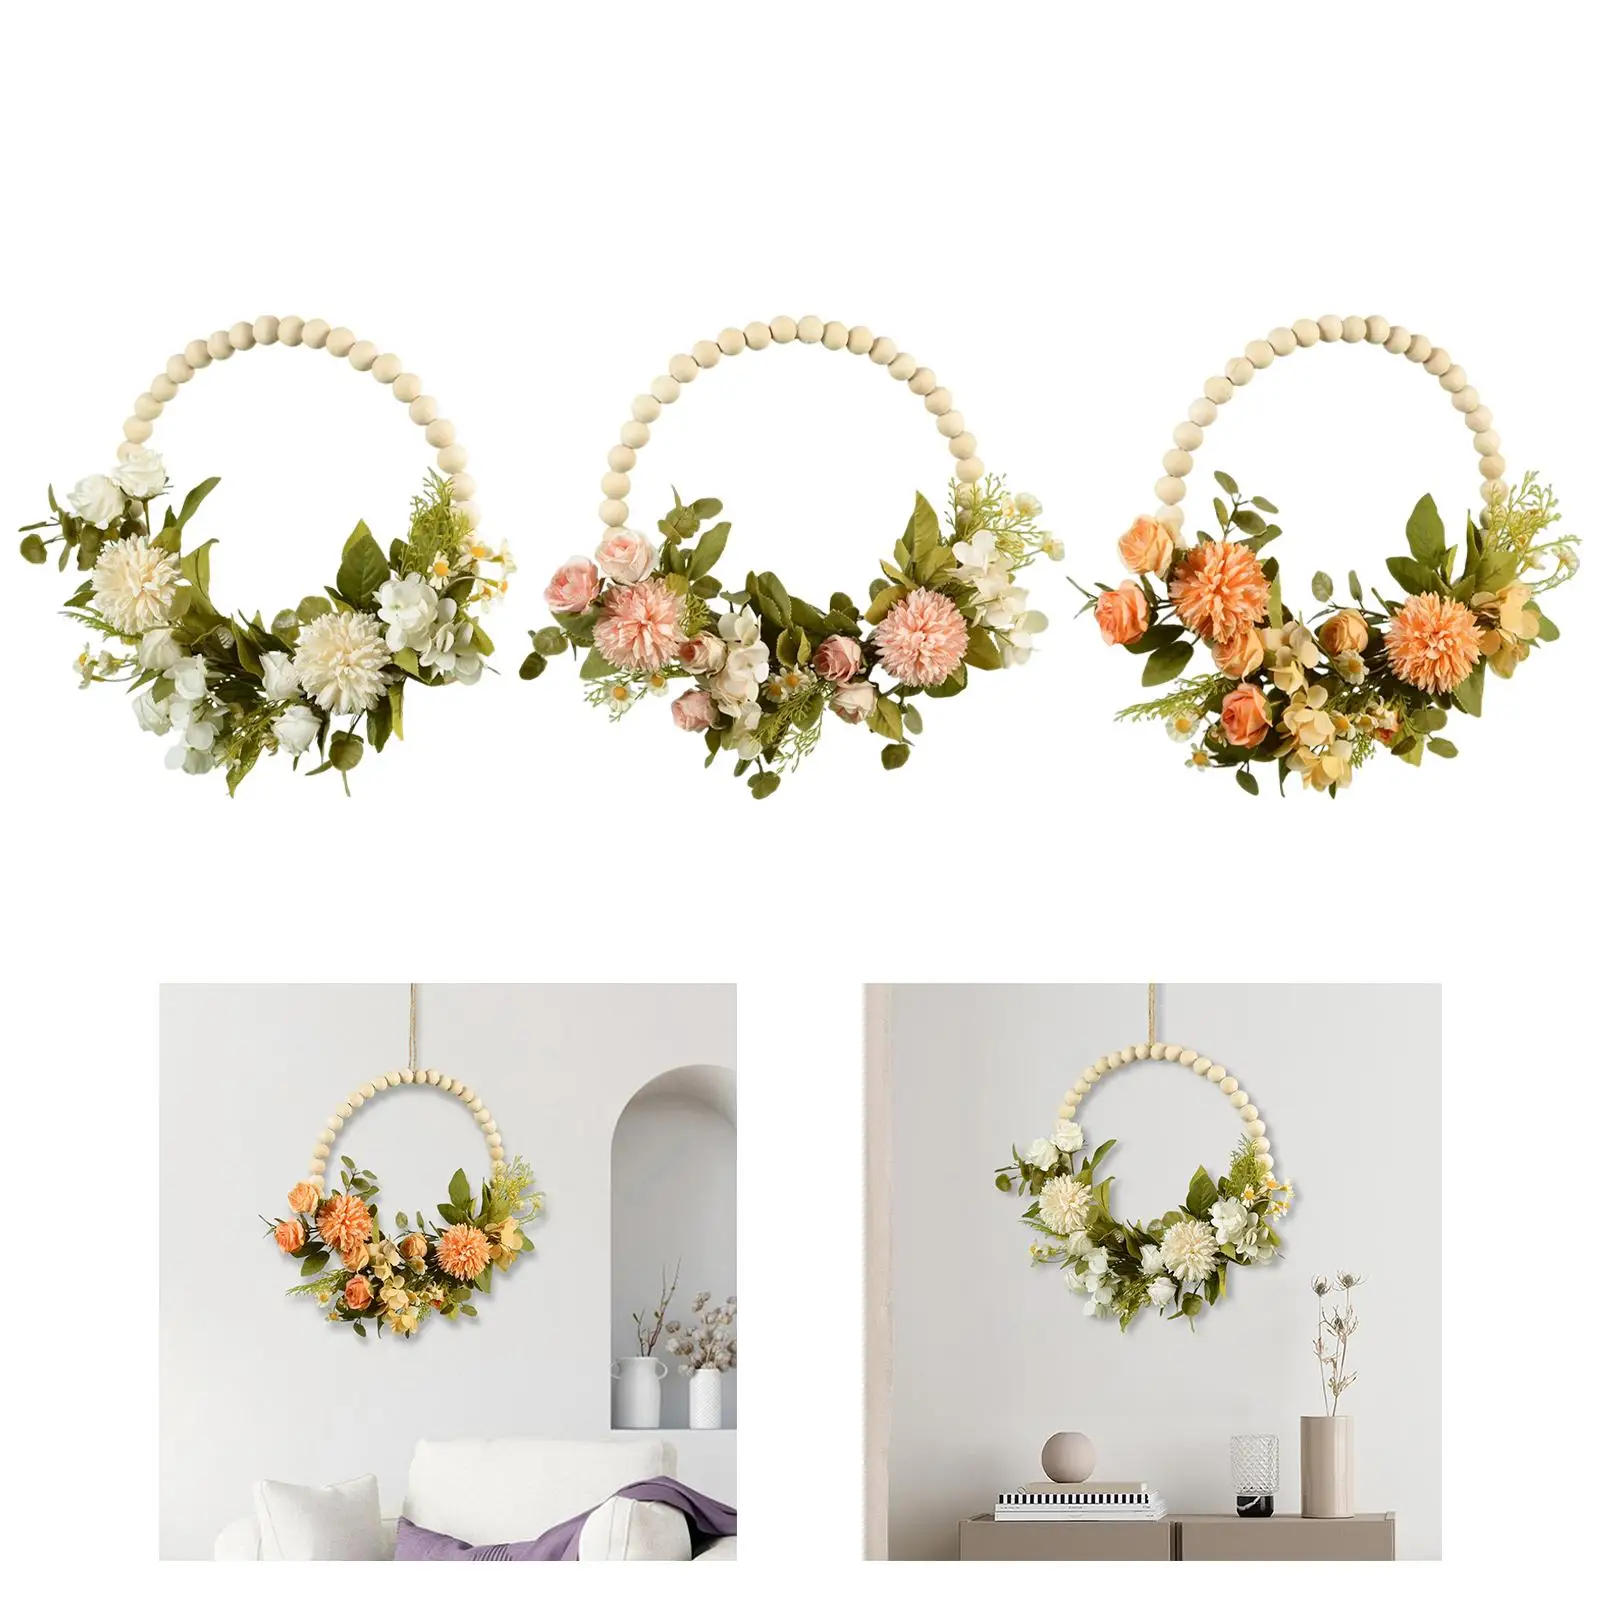 Flower Wreath Door Garland Wood Beads Circle Hanging Spring Wreath Greenery Leaves for Backdrop Home Indoor Decoration